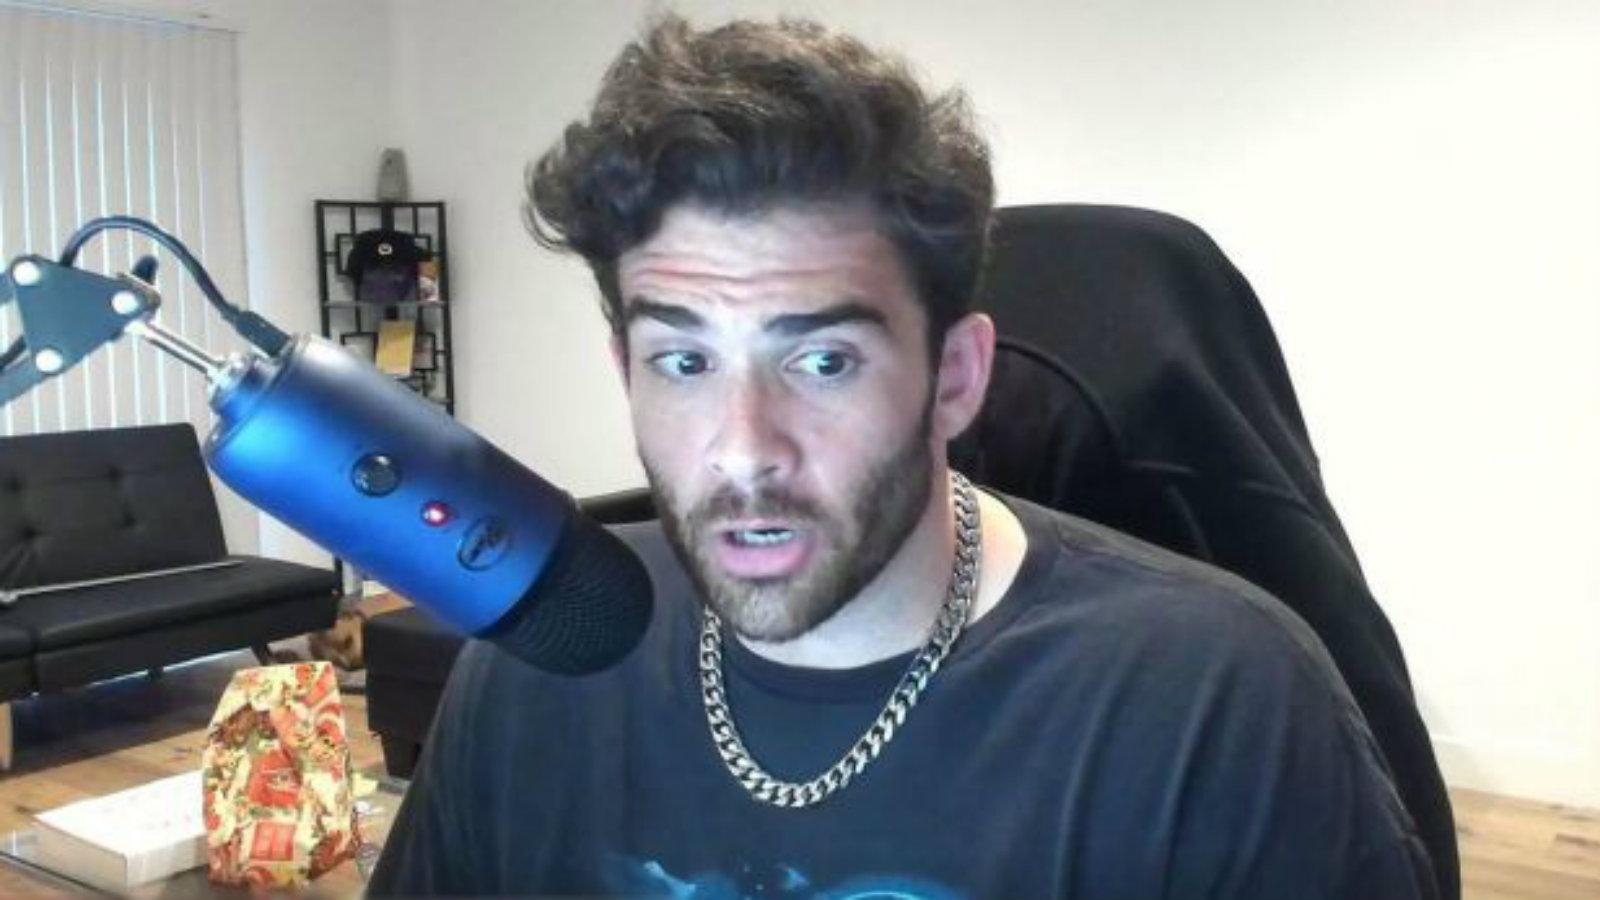 An image of Hasan Piker conducting a Twitch stream.